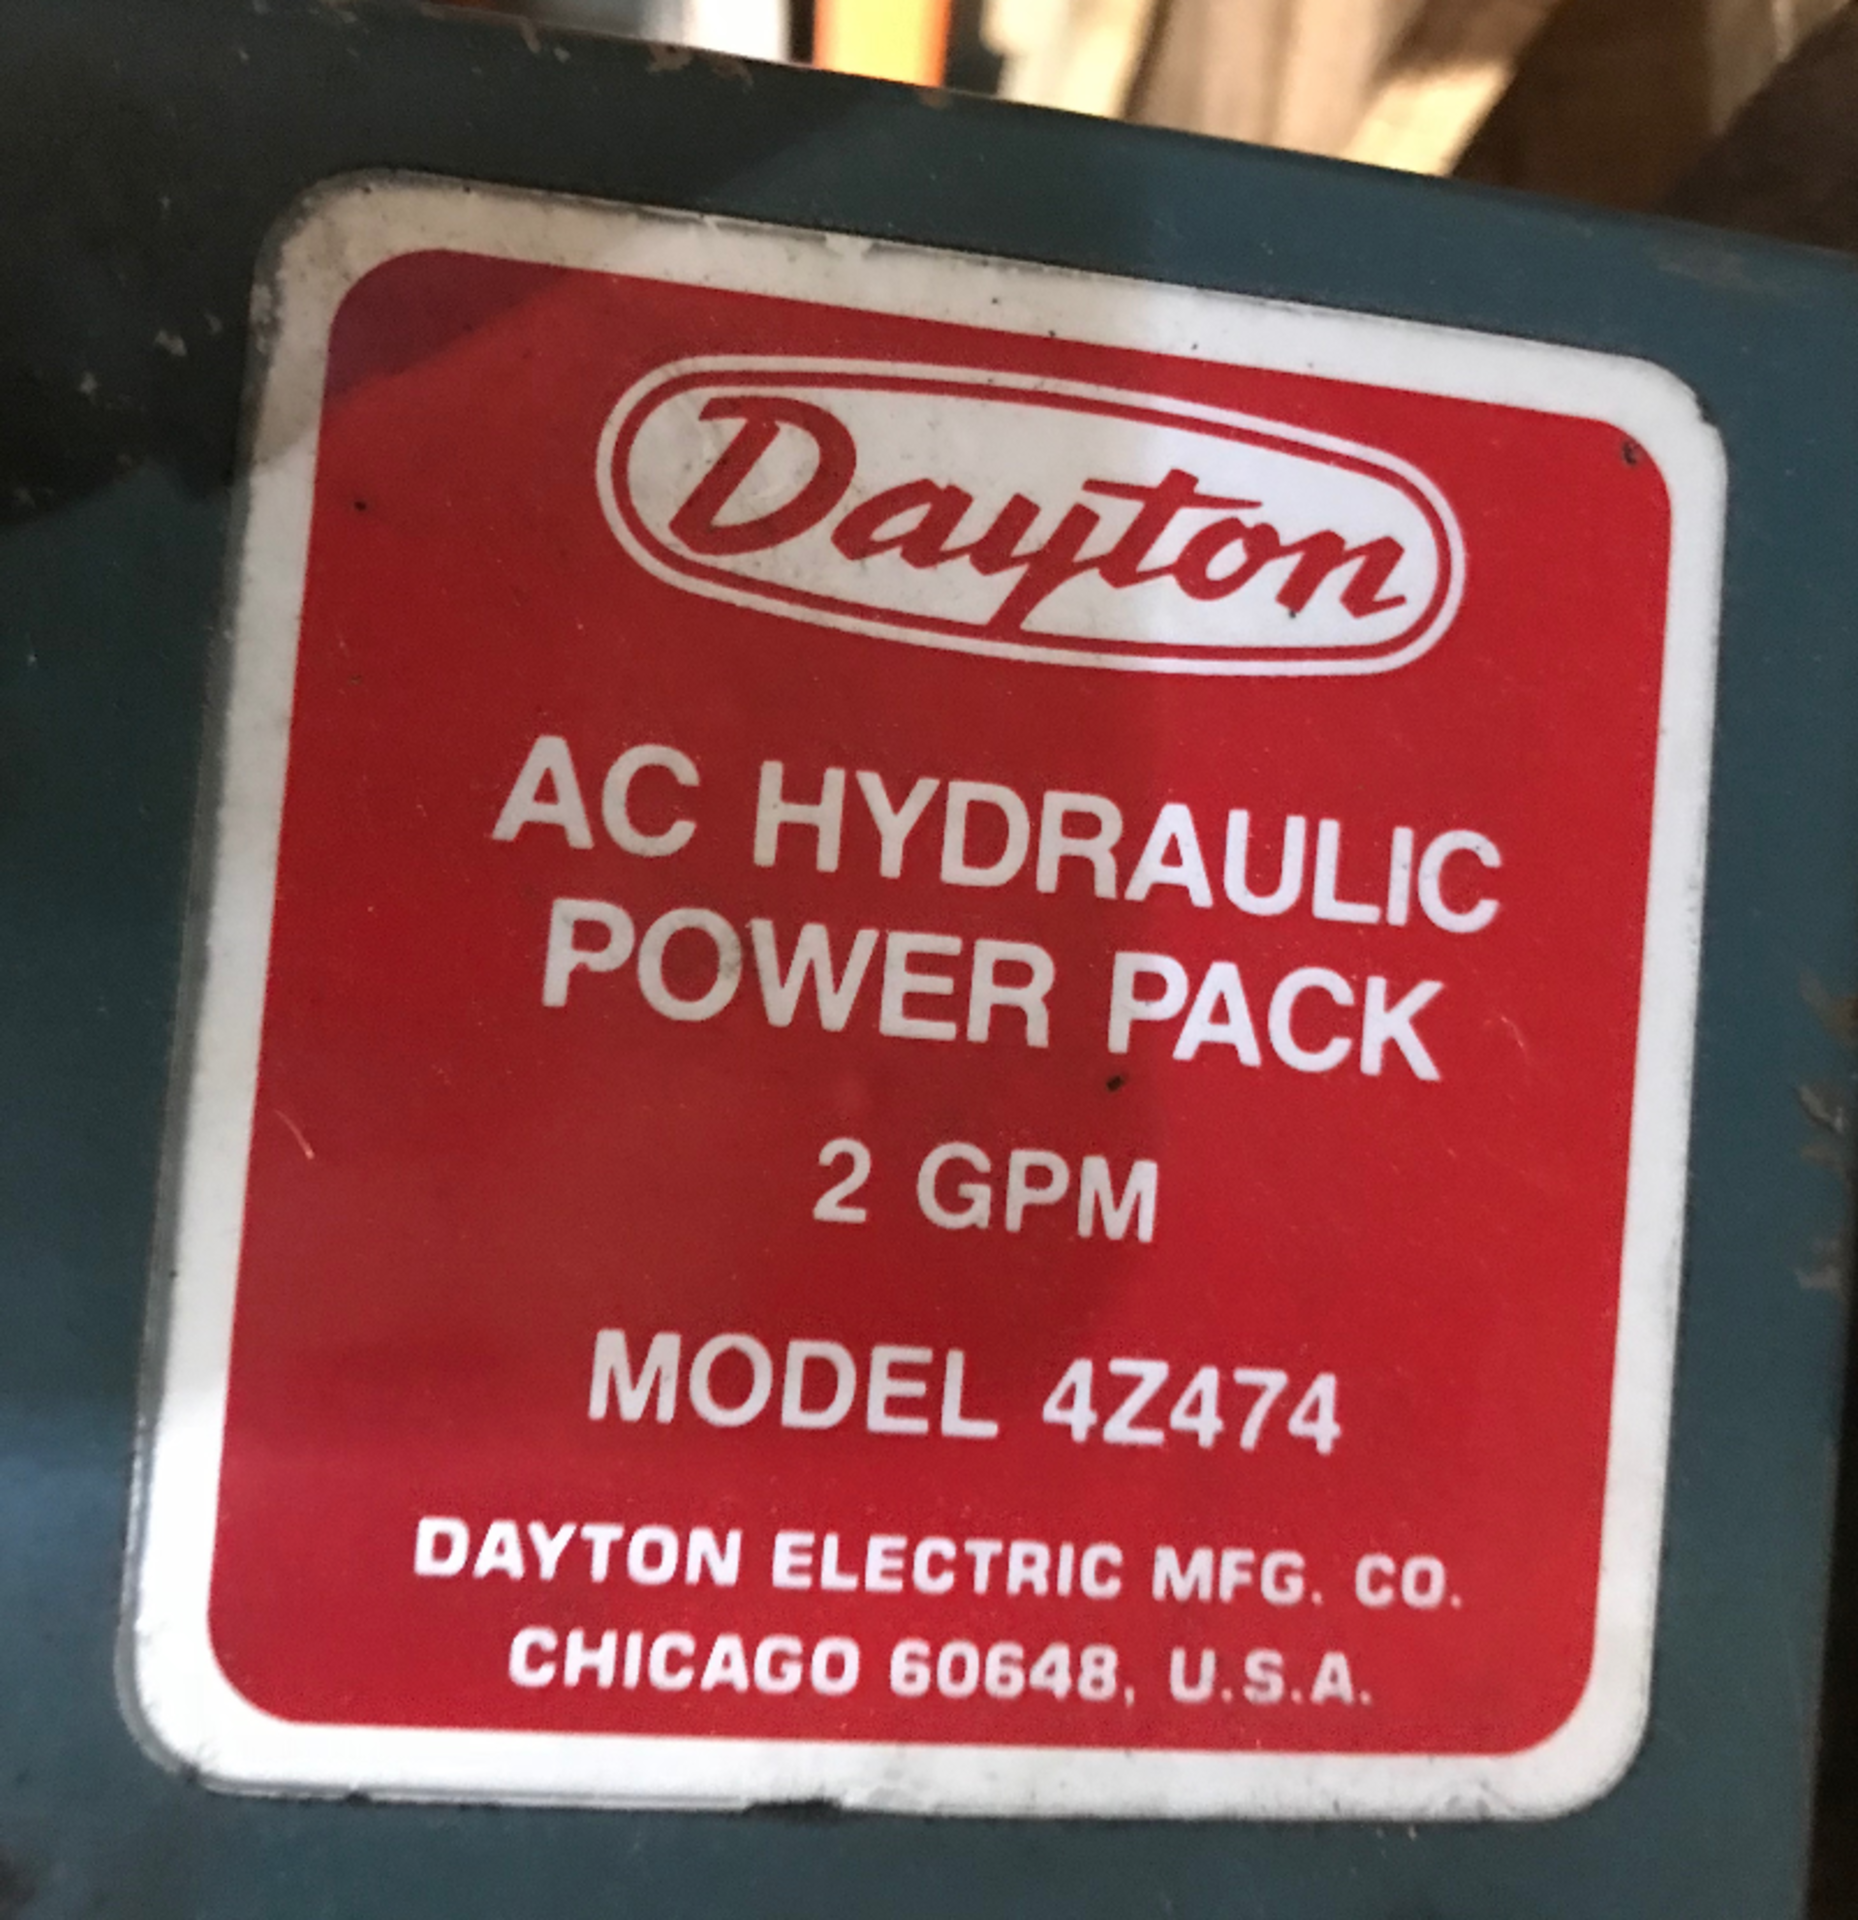 Dayton AC Hydraulic Power Pack, Model 4Z474, 2 GPM, Rigging Fee For This Item Is $30 - Image 5 of 5